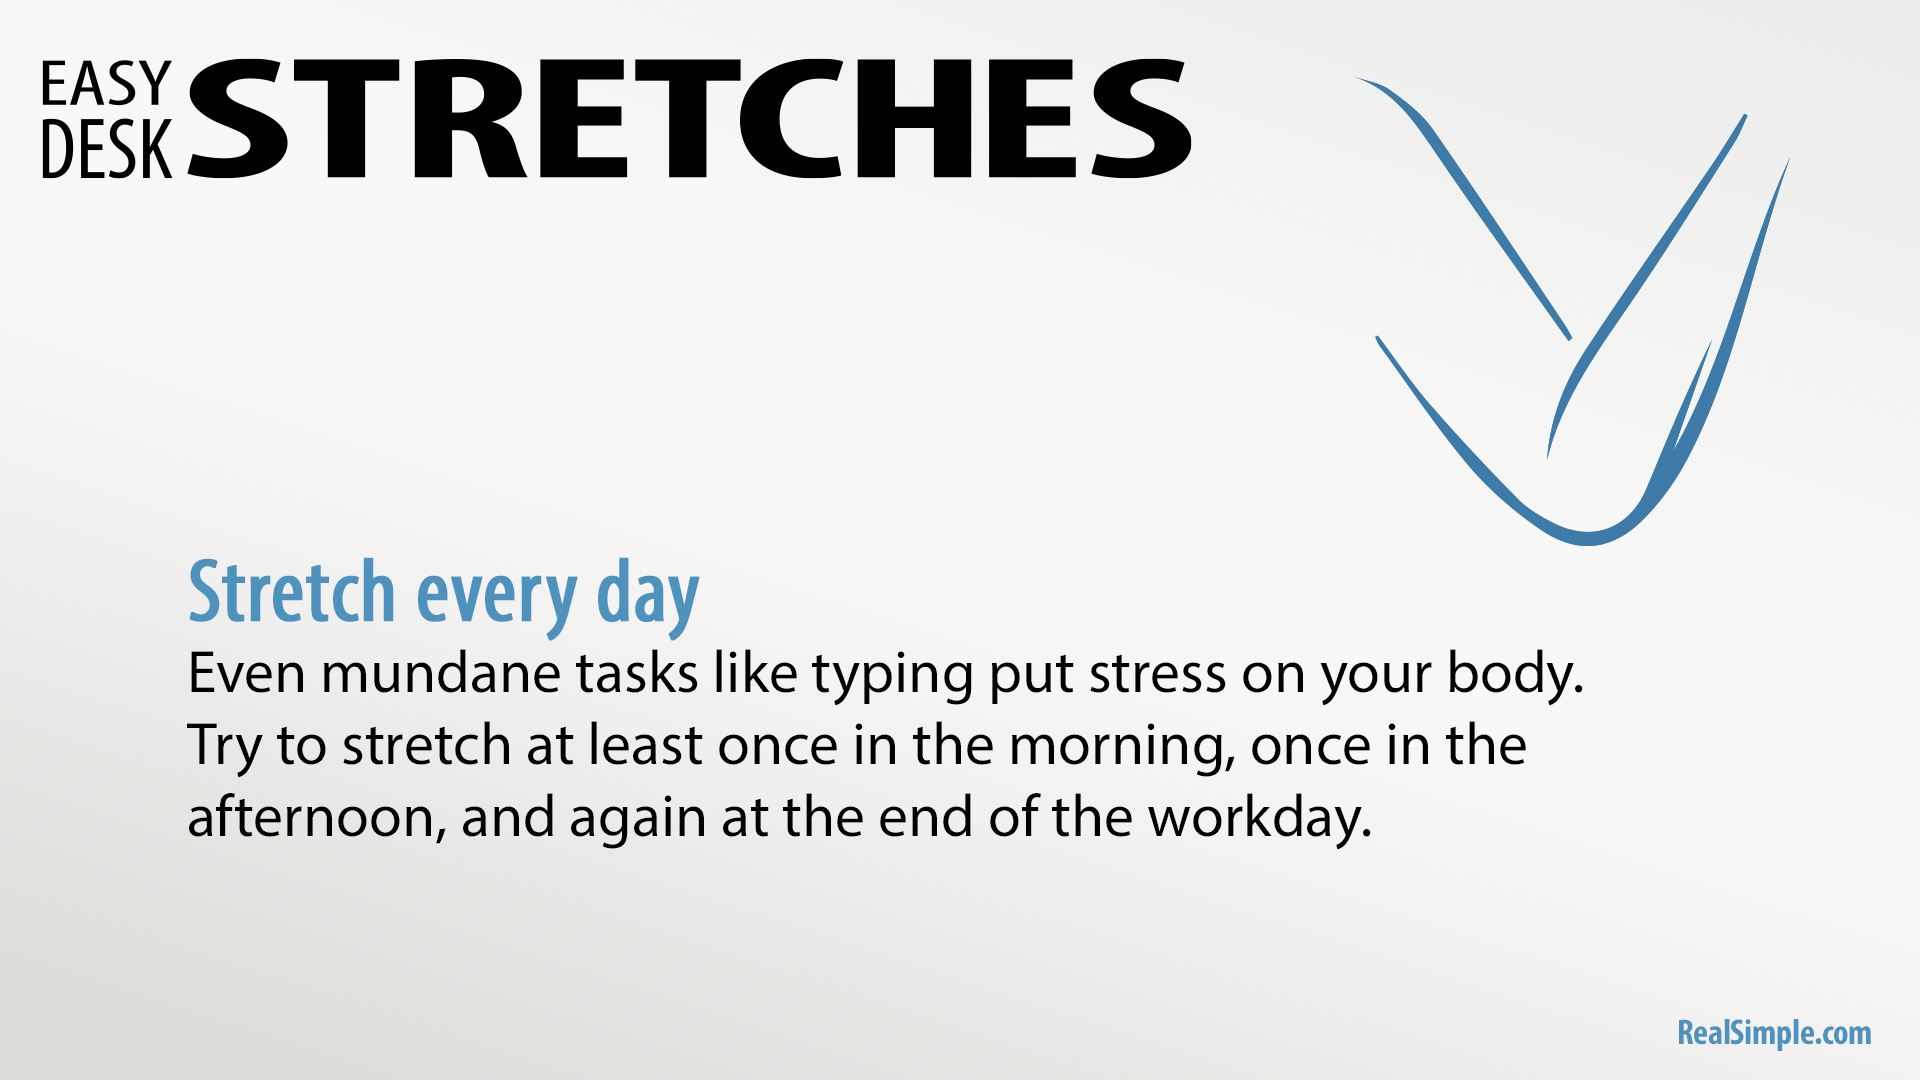 Free Graphic | Easy Desk Stretches | Stretch Every Day